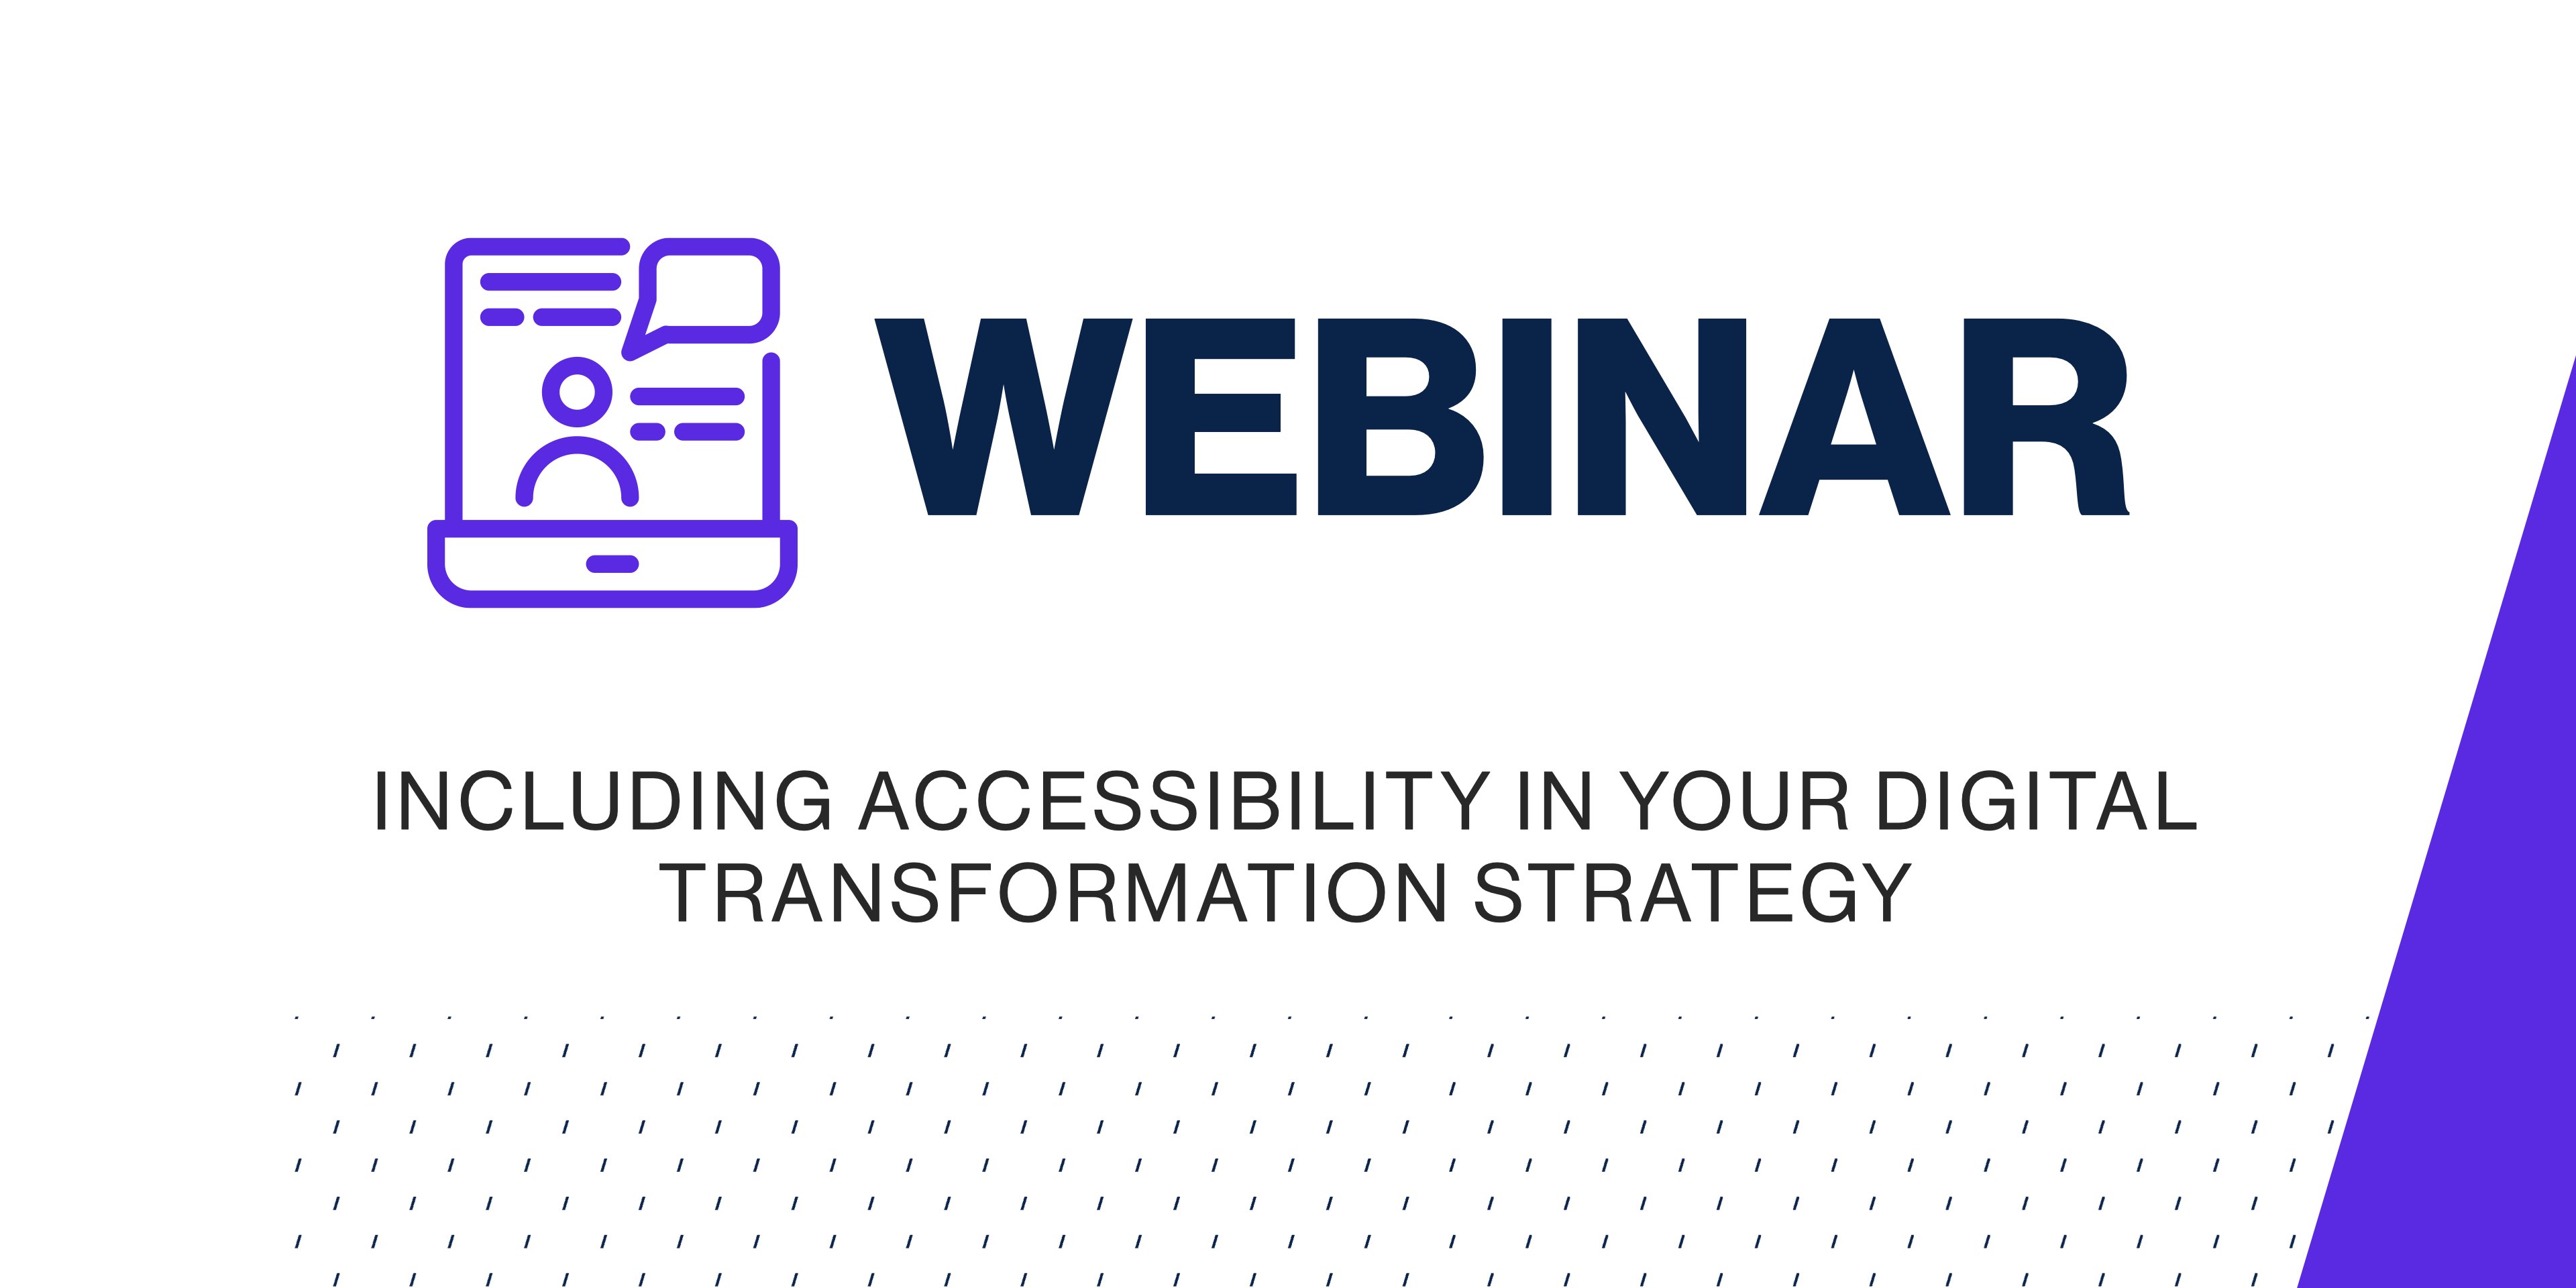 Including Accessibility in Your Digital Transformation Strategy webinar link.